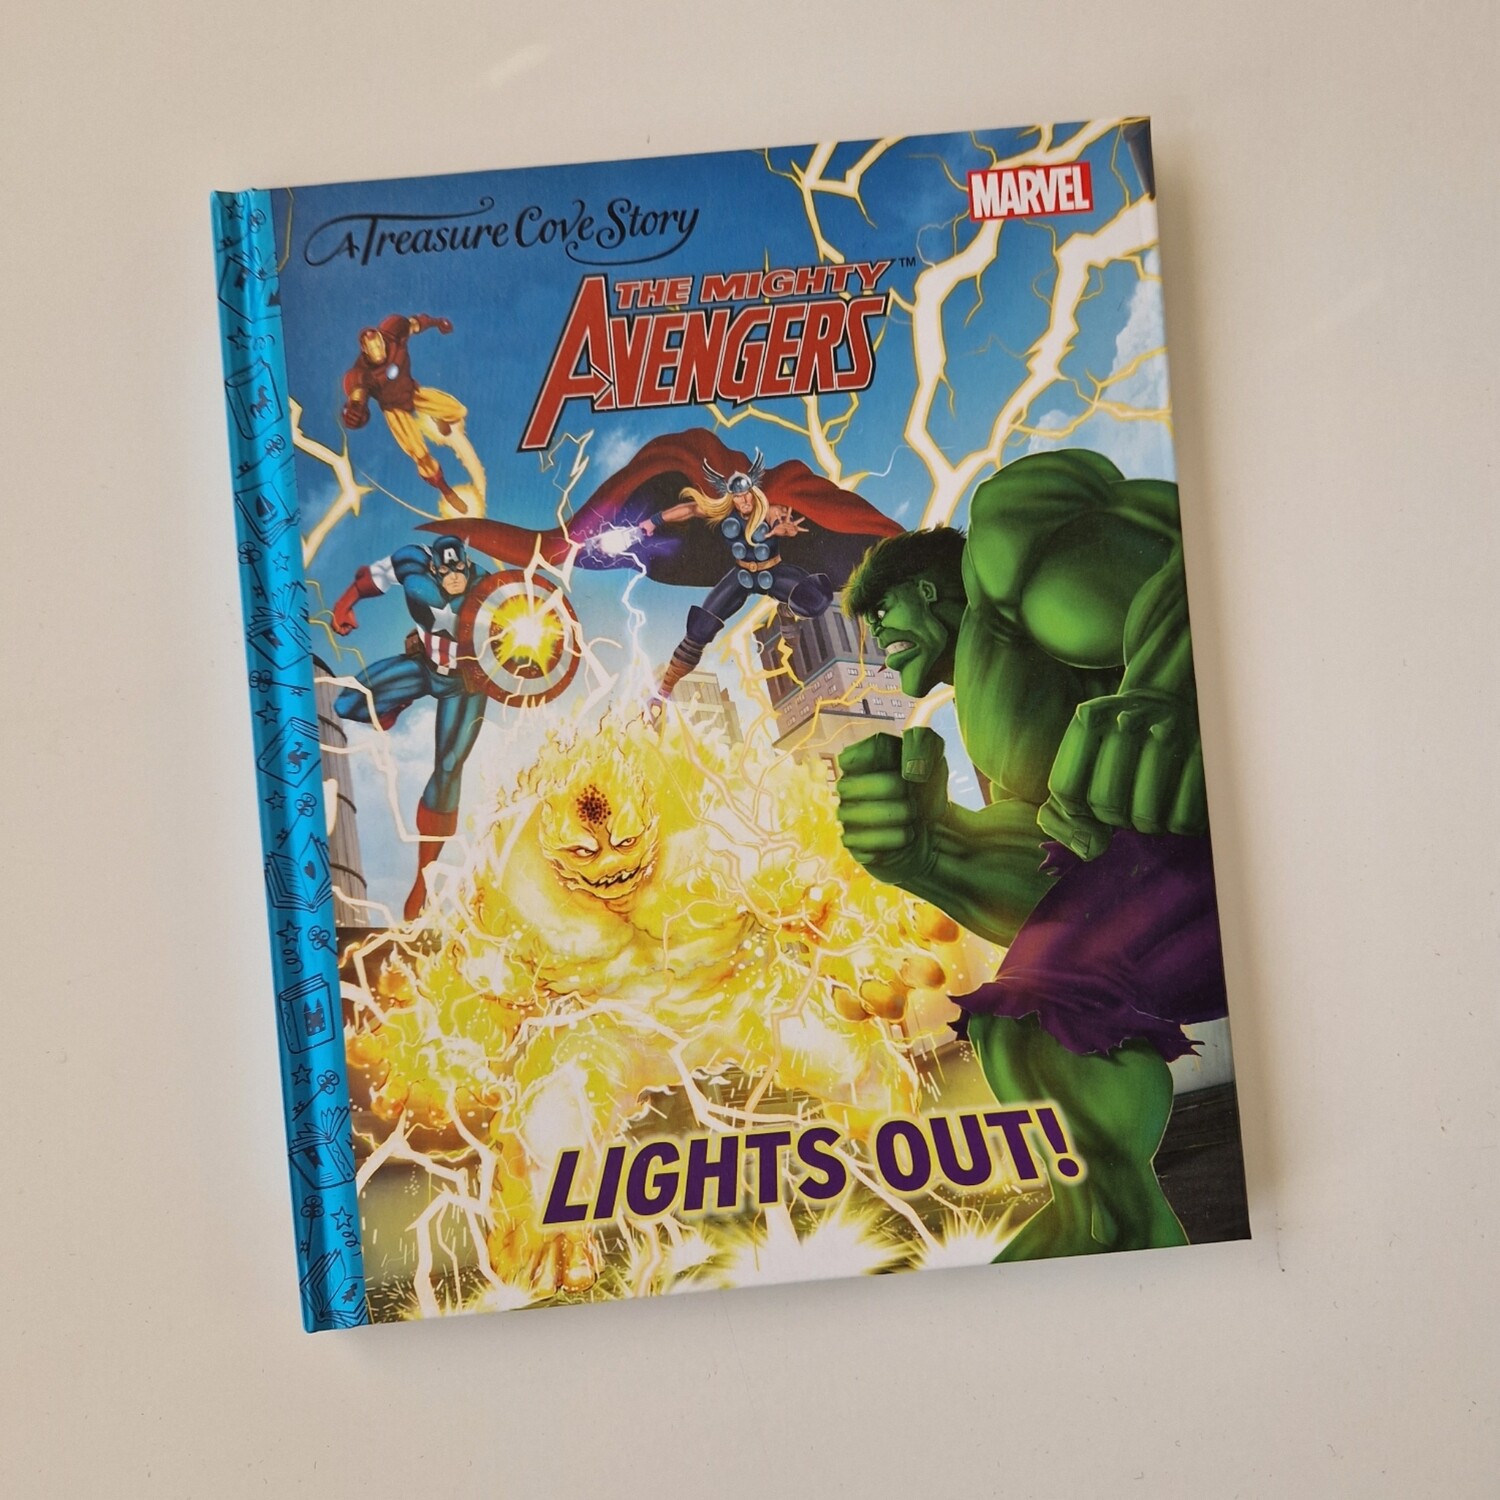 The Avengers - Notebook